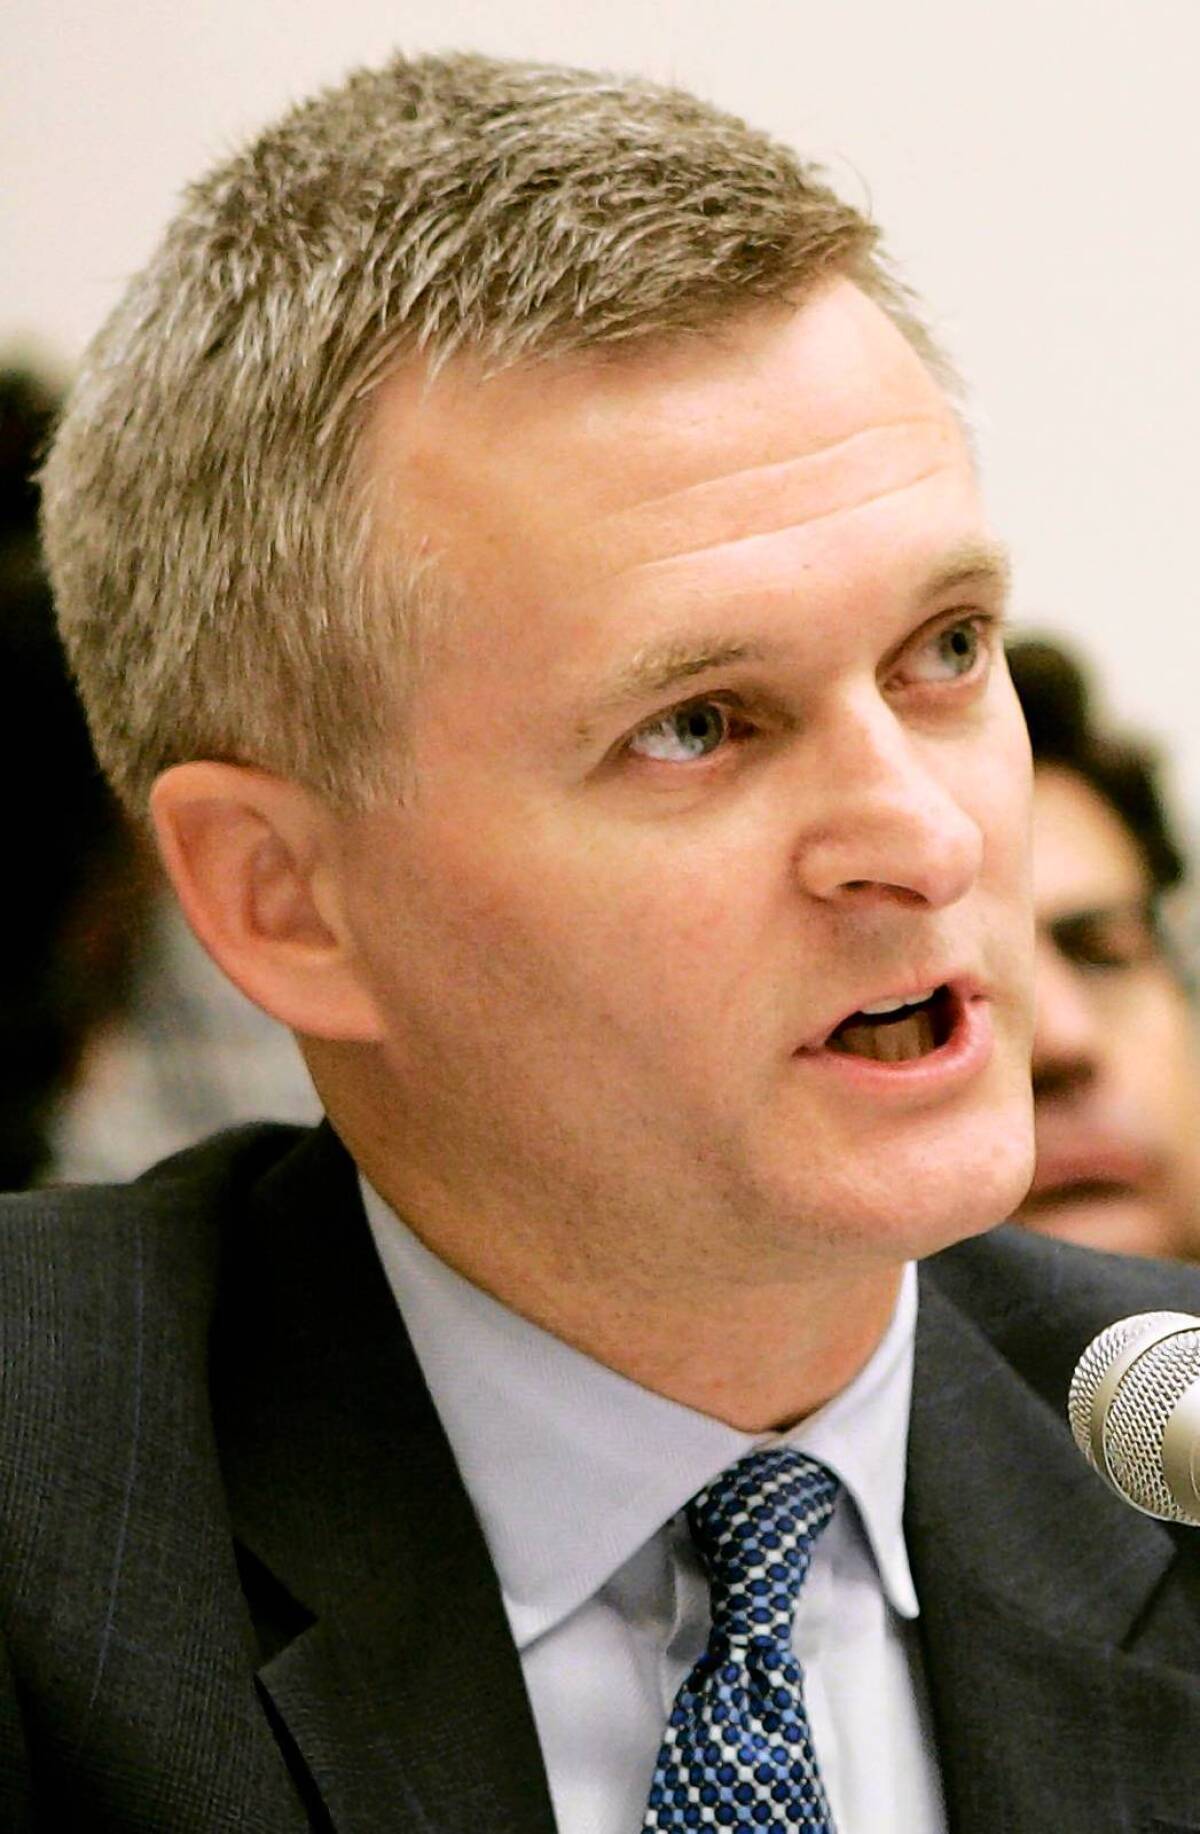 Steven Bradbury, former head of the Justice Department's Office of Legal Counsel under President George W. Bush, told an oversight panel that the dialing records collected by the NSA are stored but not searched unless investigators are tracking the phone calls of suspected terrorists.